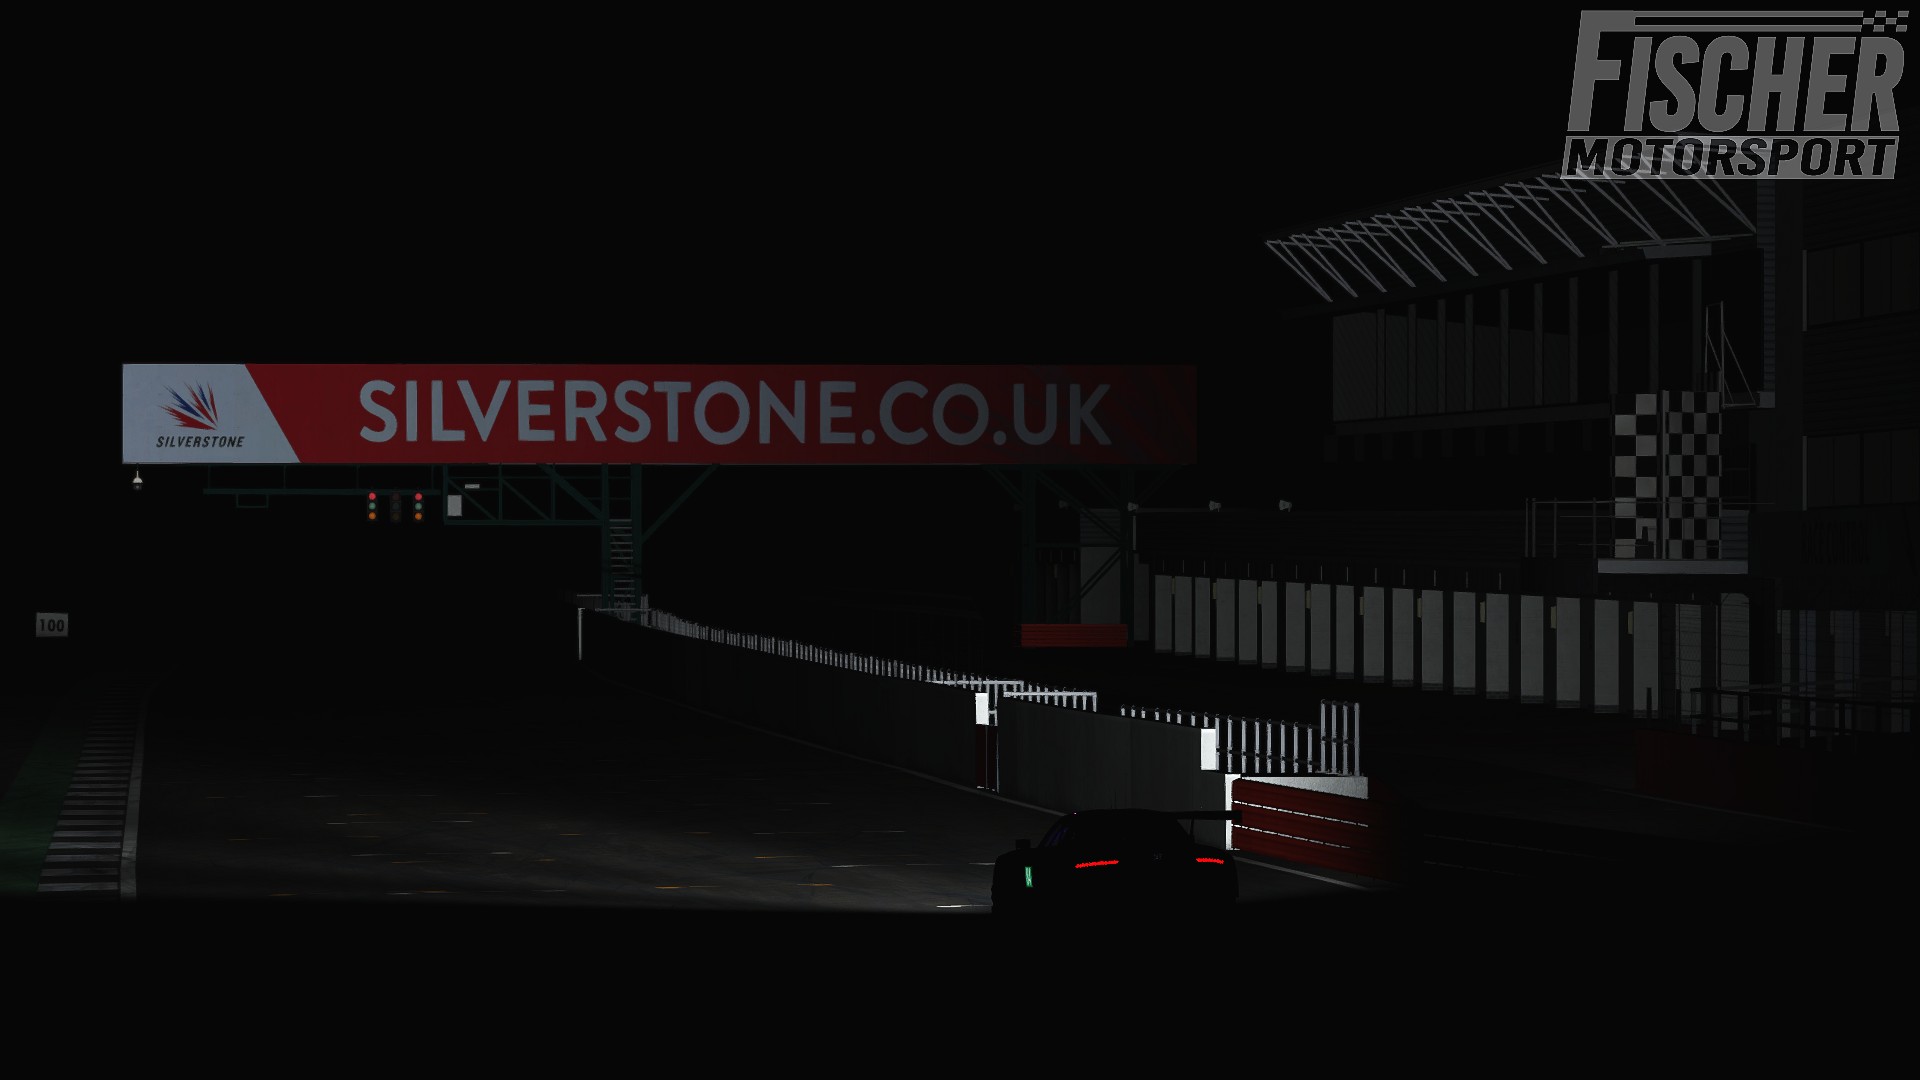 6 HOURS OF SILVERSTONE